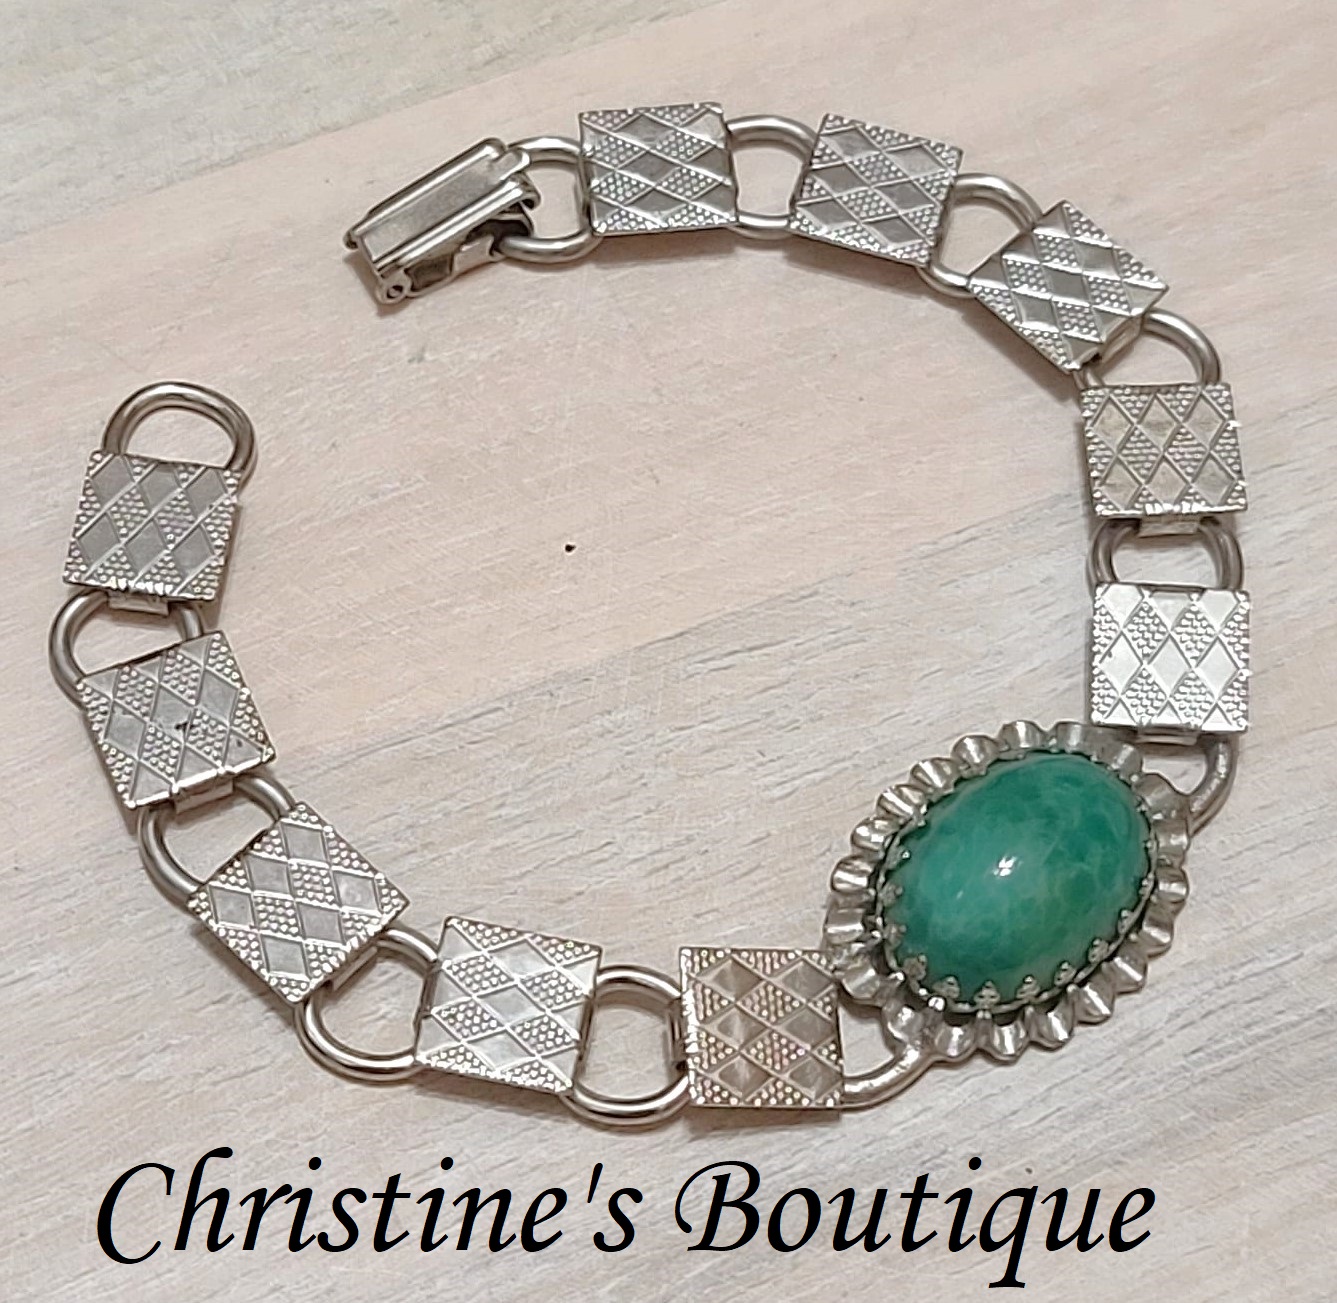 Vintage bracelet, green cabachon center, silvertone with etched detail on band